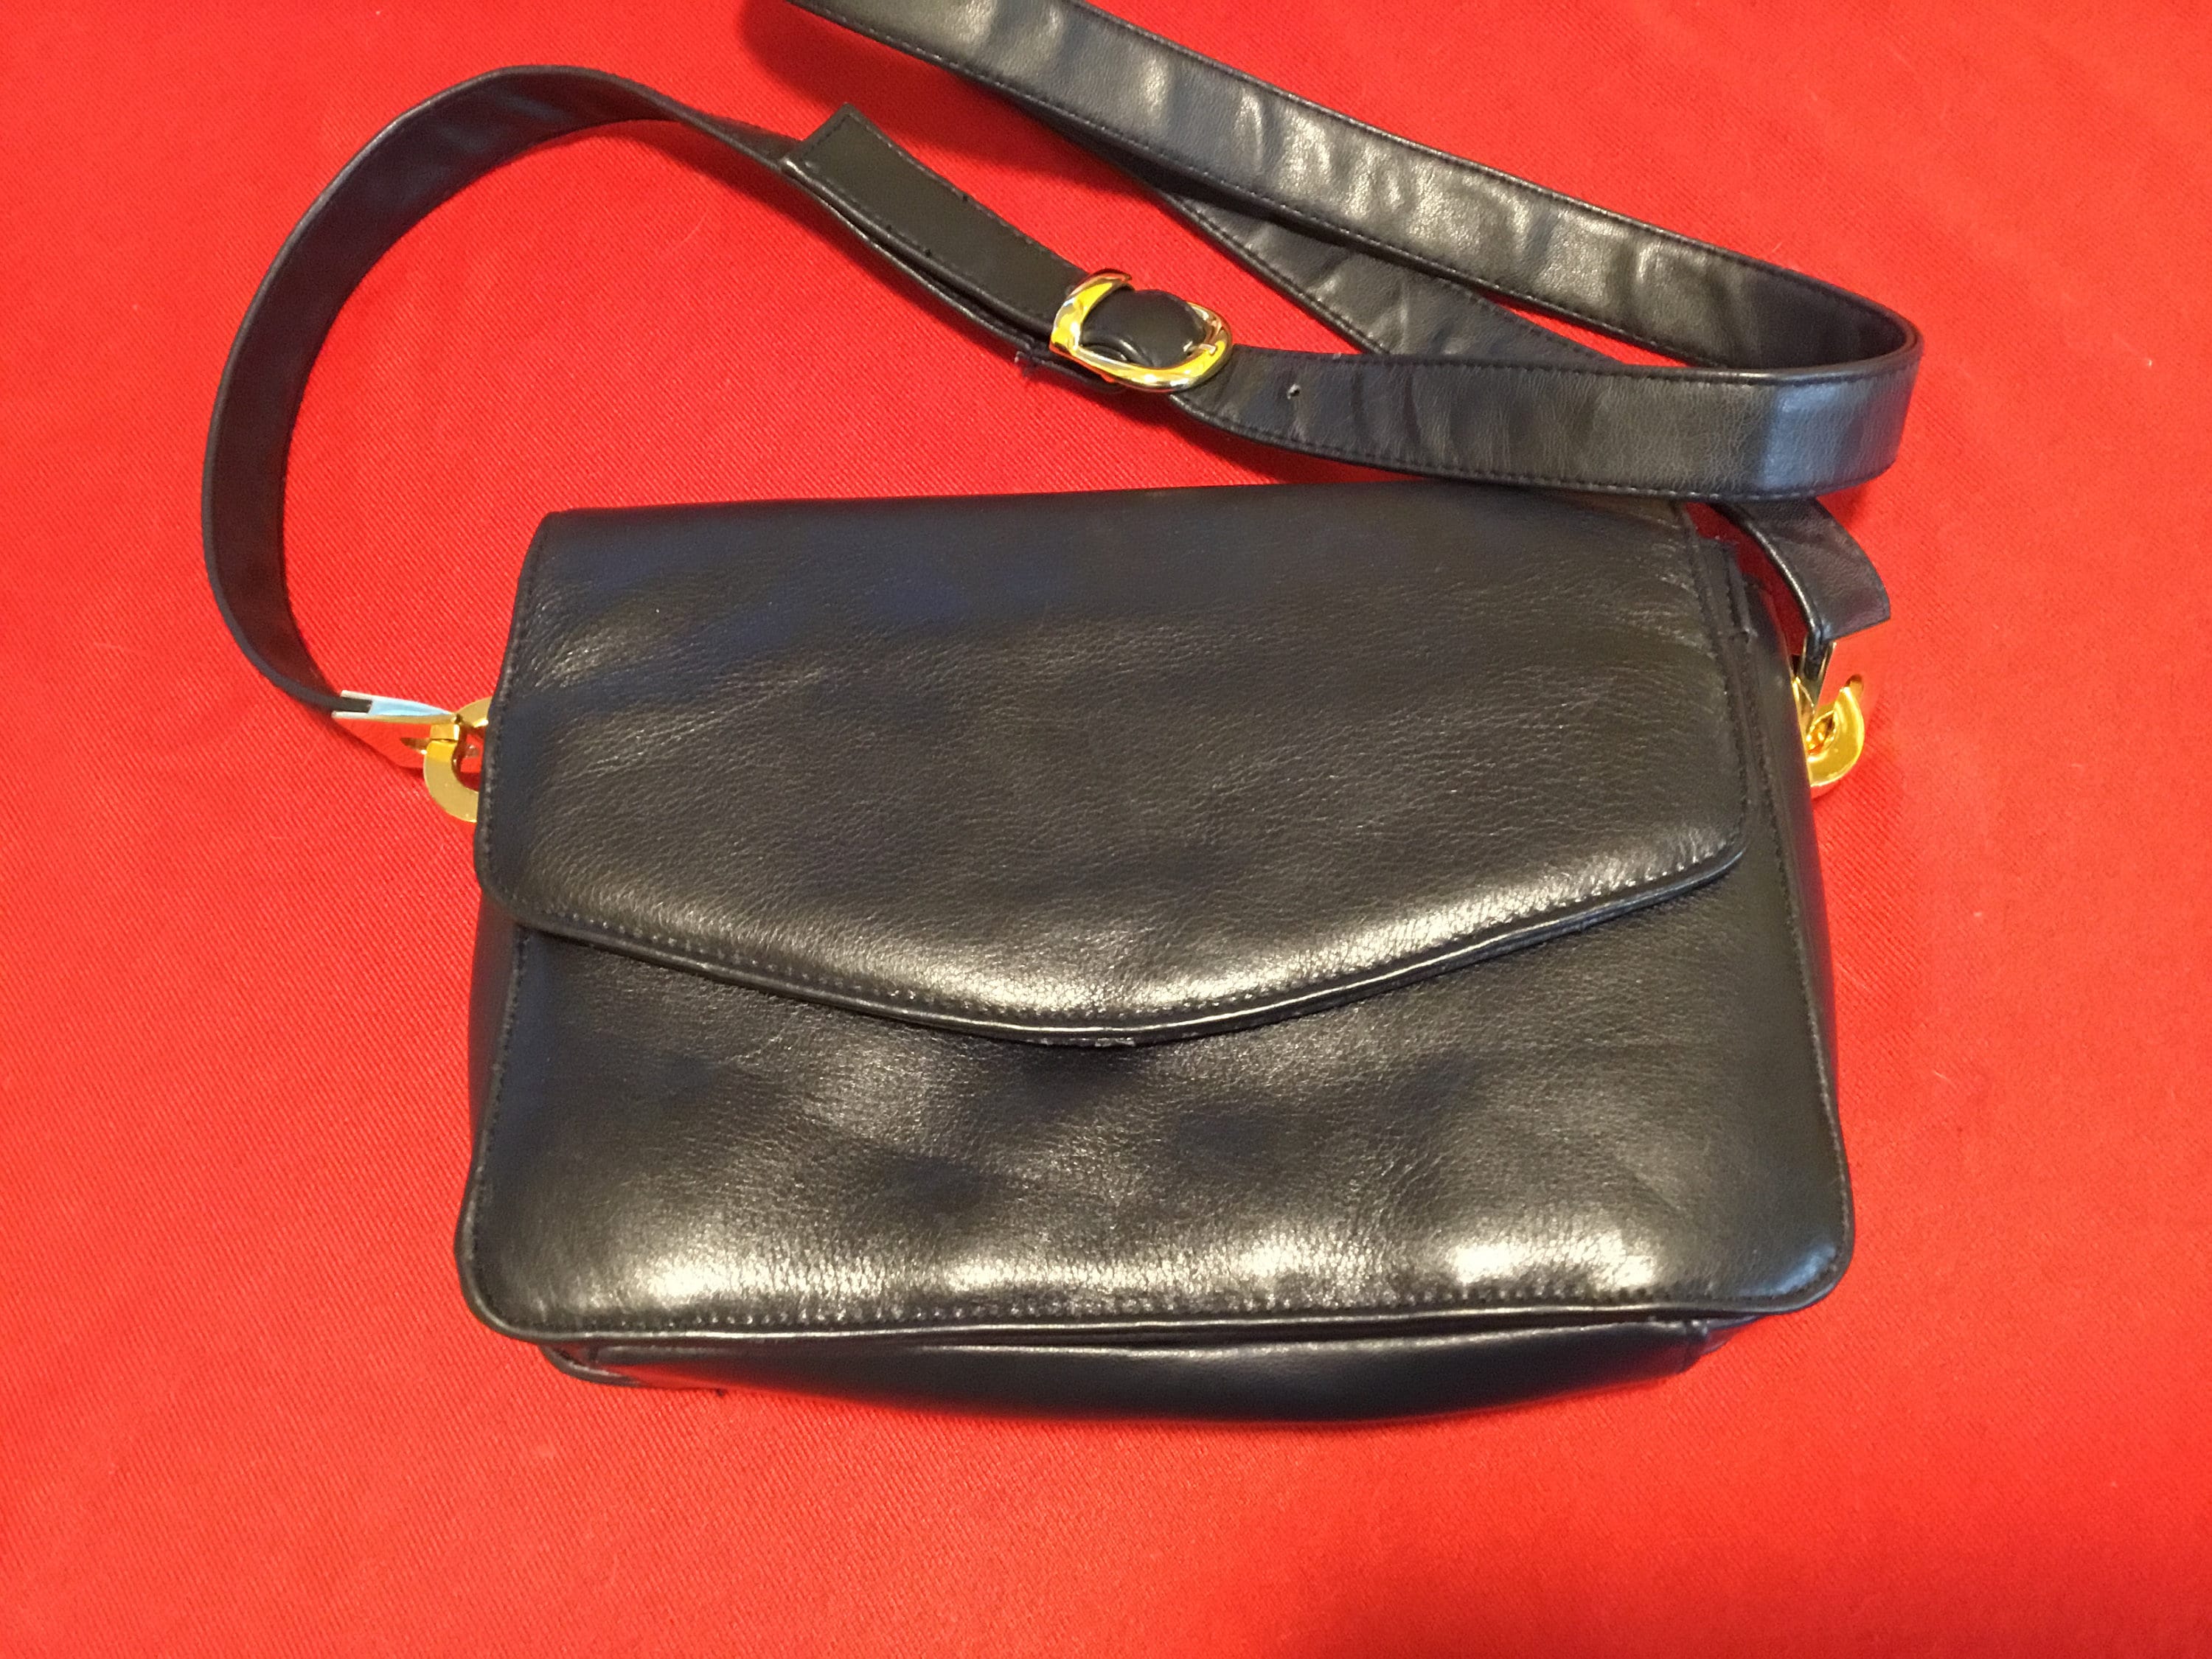 TJMAXX Patent Leather Crossbody With Front Lock - ShopStyle